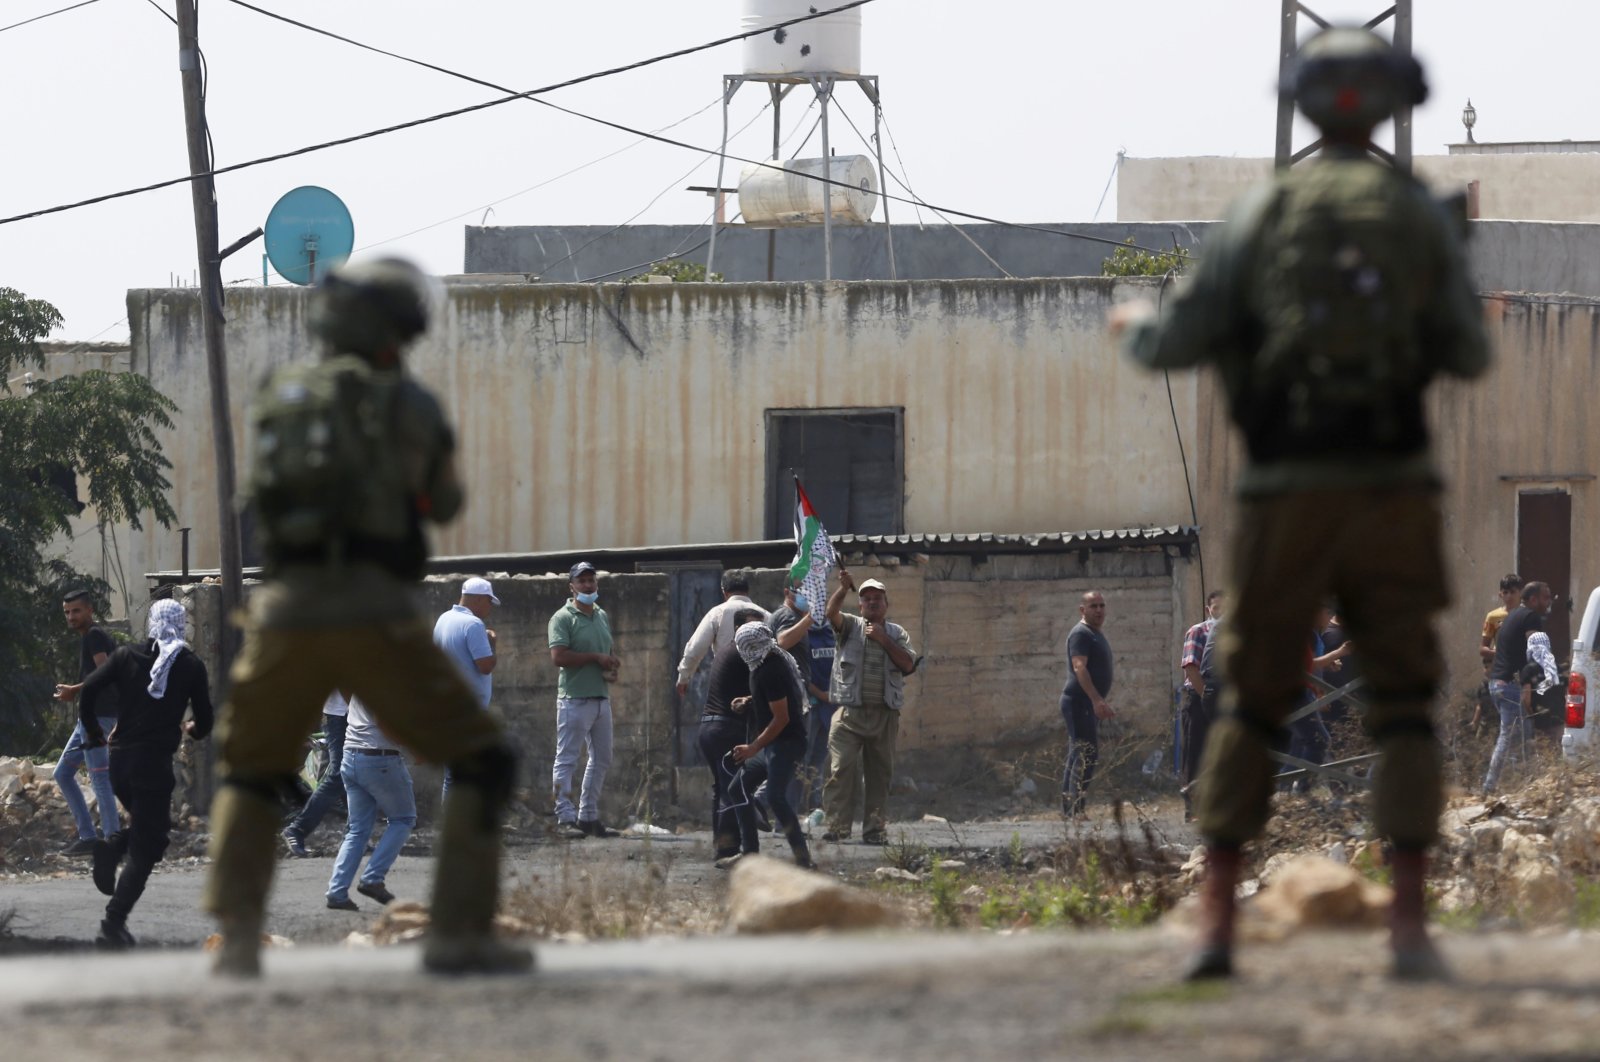 Israeli troops clash with the Palestinian demonstrators following a weekly demonstration against Israeli Jewish settlements, in the West Bank, Sept. 4, 2020. (AP Photo)